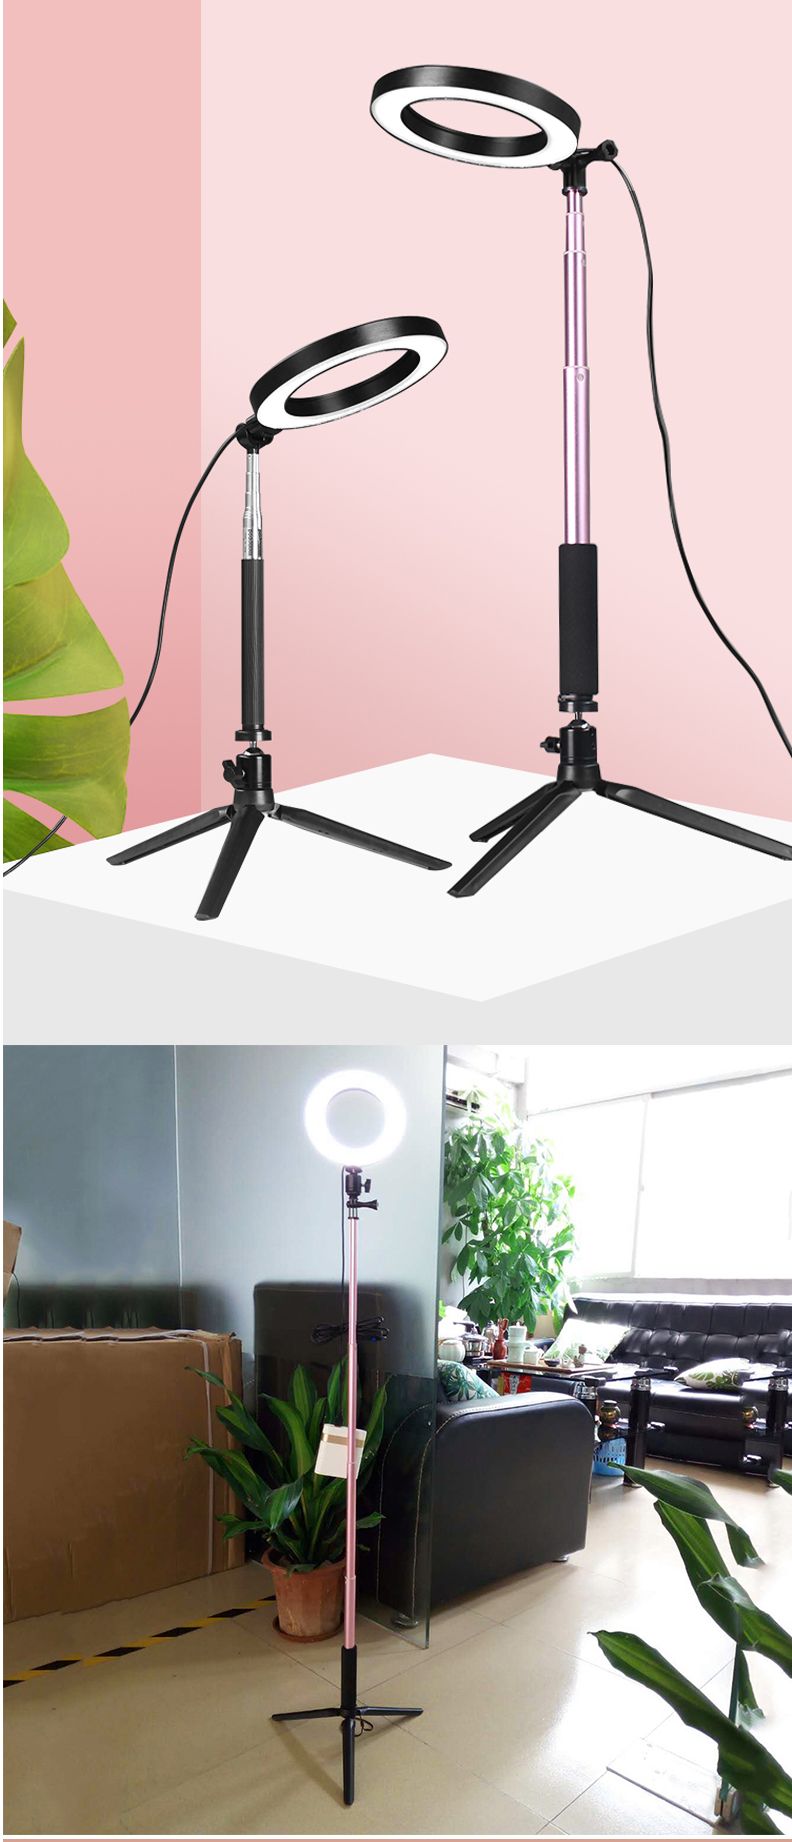 Yingnuost-26CM-3500-5500k-Video-Ring-Light-with-100cm-Extendable-Selfie-Stick-Stand-Tripod-Phone-Cli-1567915